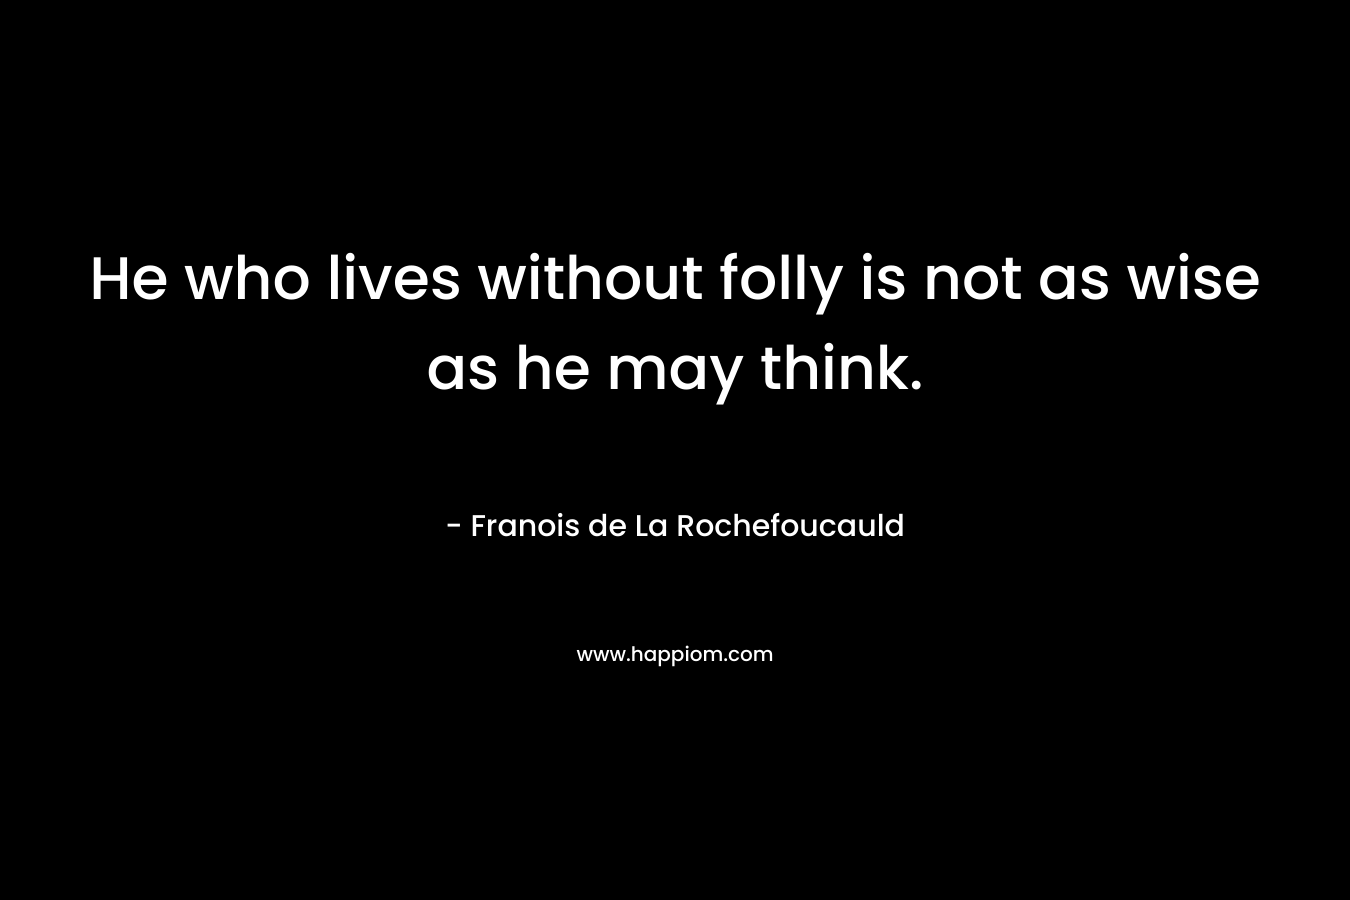 He who lives without folly is not as wise as he may think. – Franois de La Rochefoucauld